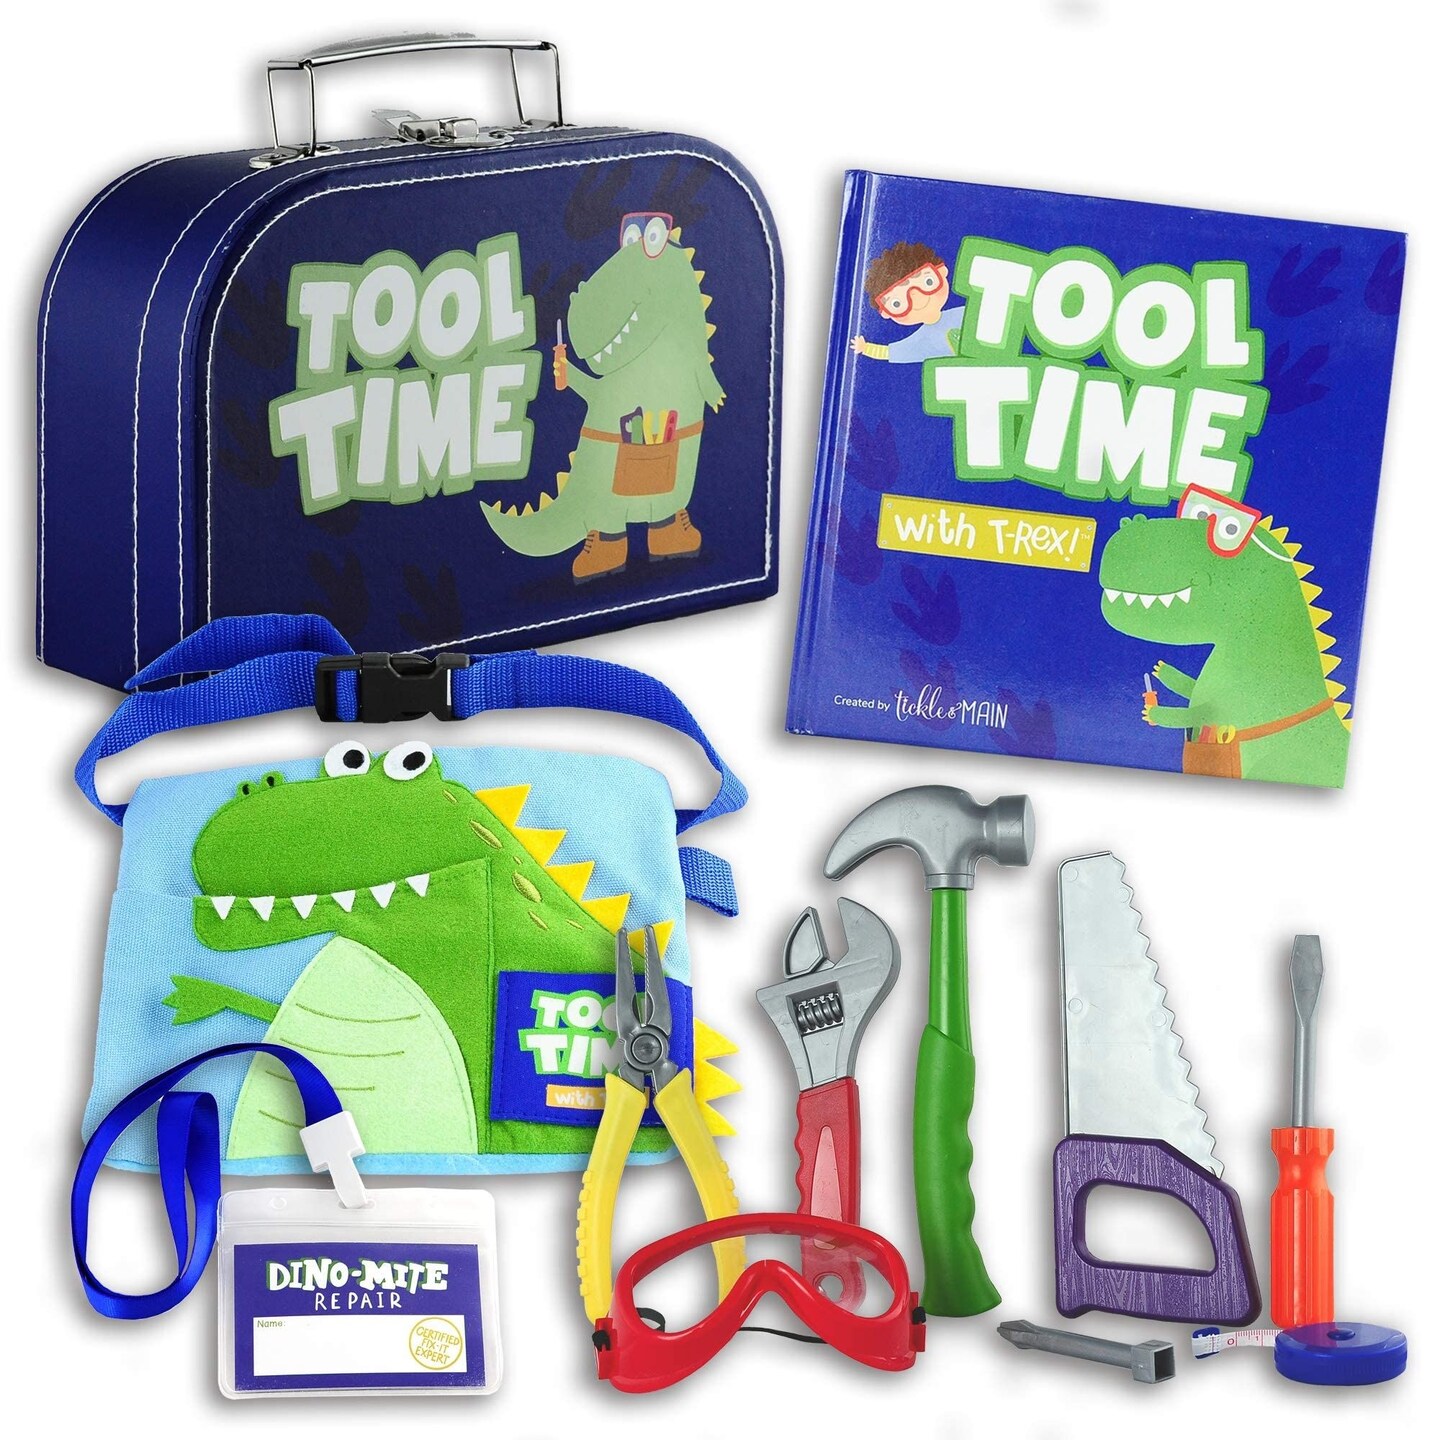 Tickle &#x26; Main Kids Tool Toys for Boys, 11 Pieces Construction Pretend Play for Toddlers, Story Book Gift Set with Tool Belt and Dino-Printed Bag, Perfect for Hands-On Learning and Skill-Building